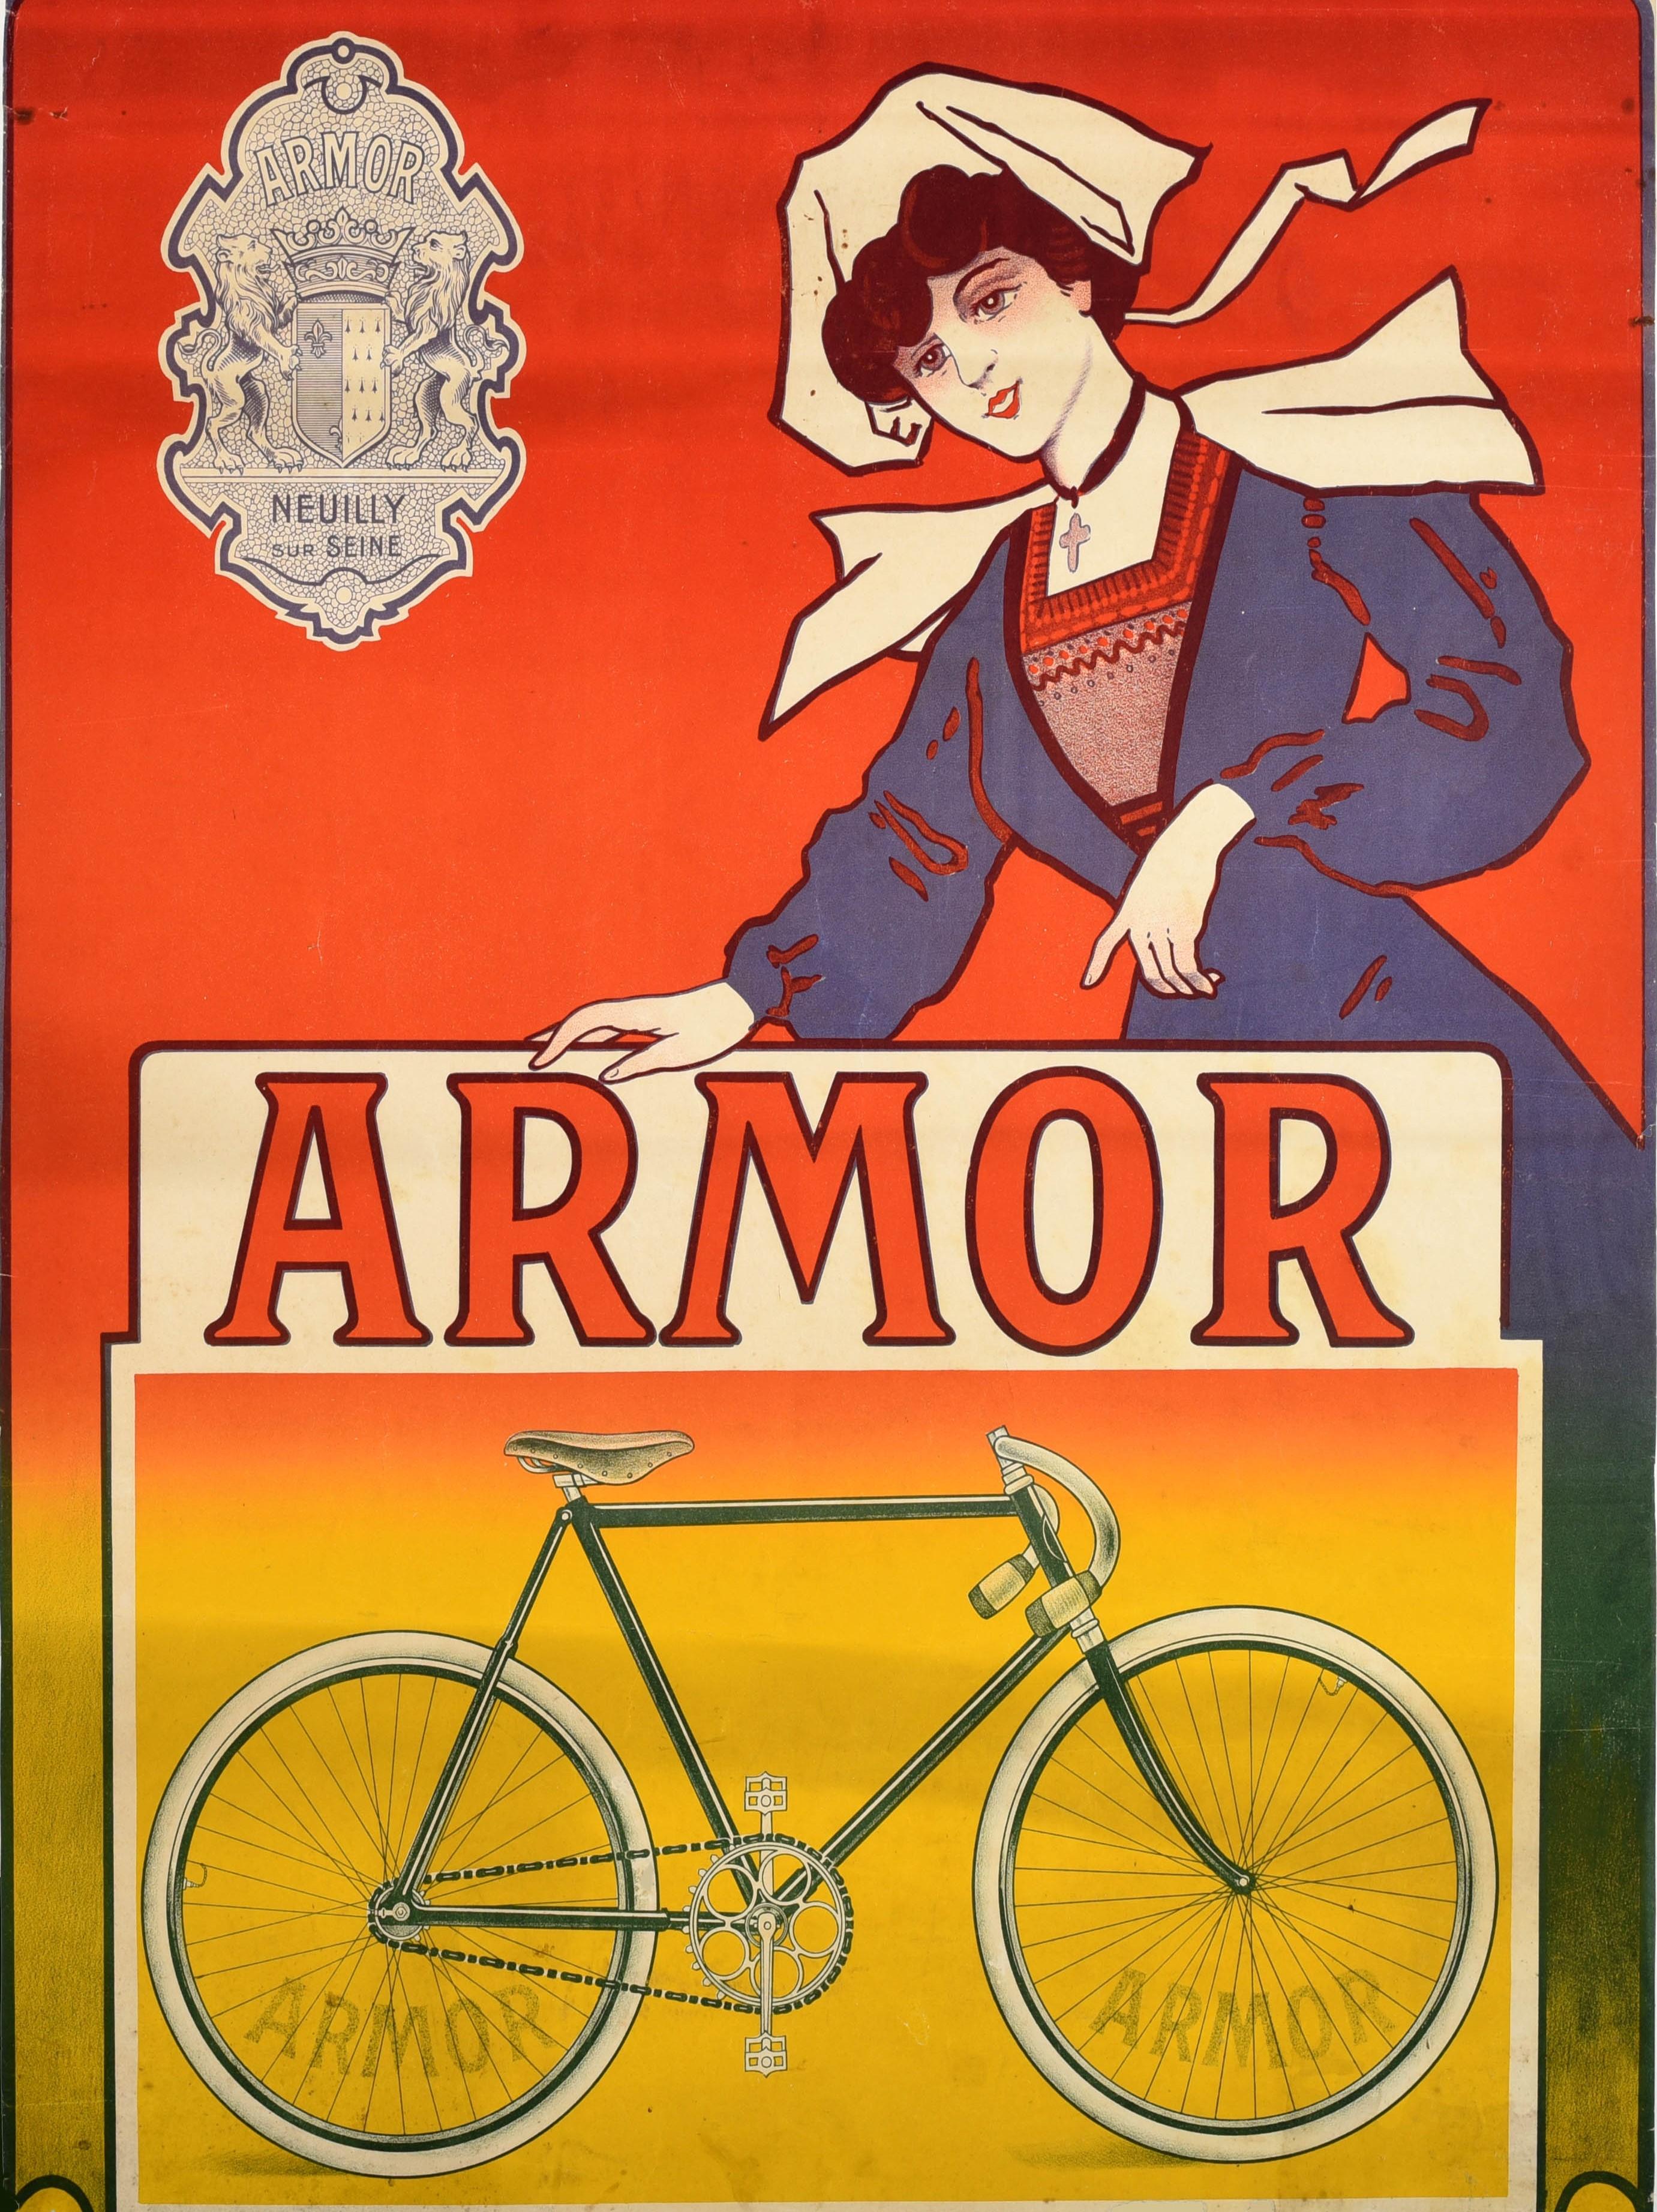 Original Antique Advertising Poster Armor Bicycles Neuilly Sur Seine France - Orange Print by Unknown